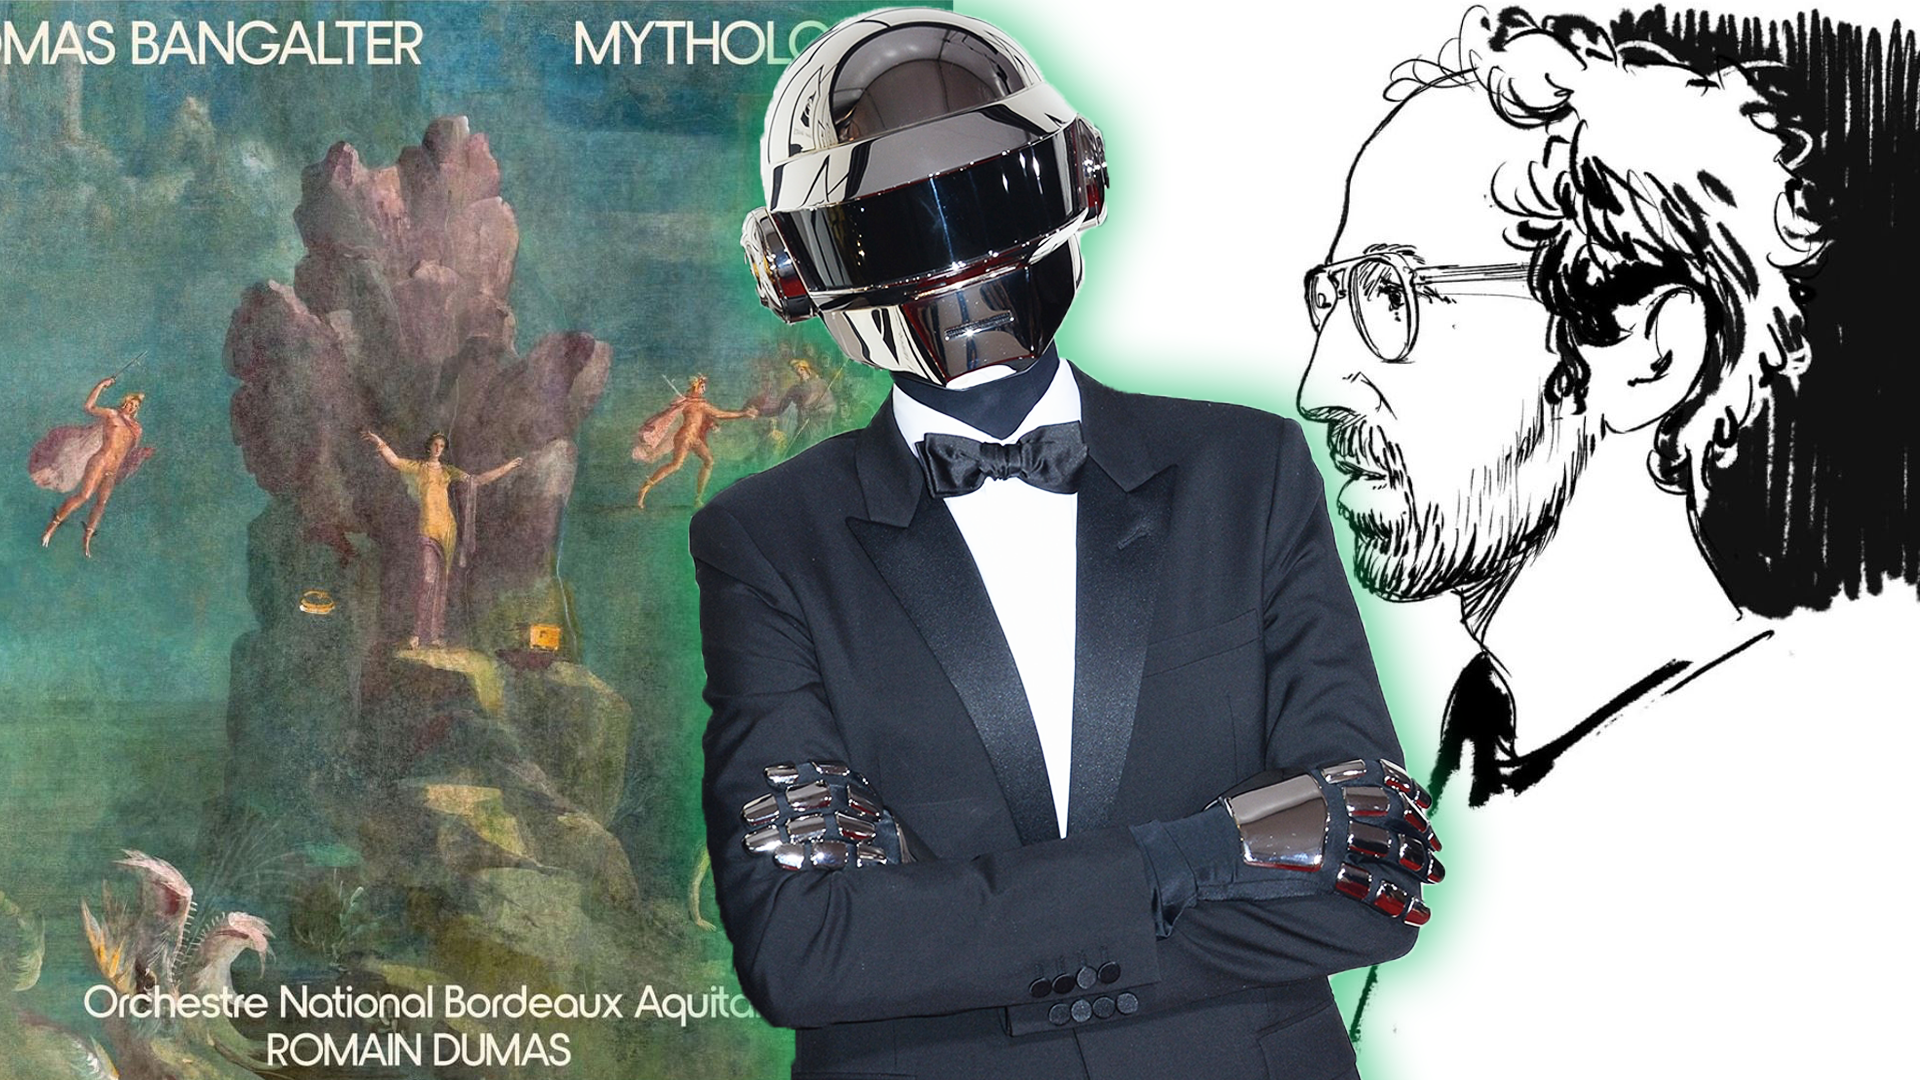 One half of Daft Punk announces his 'radically different' solo album ' Mythologies' is coming